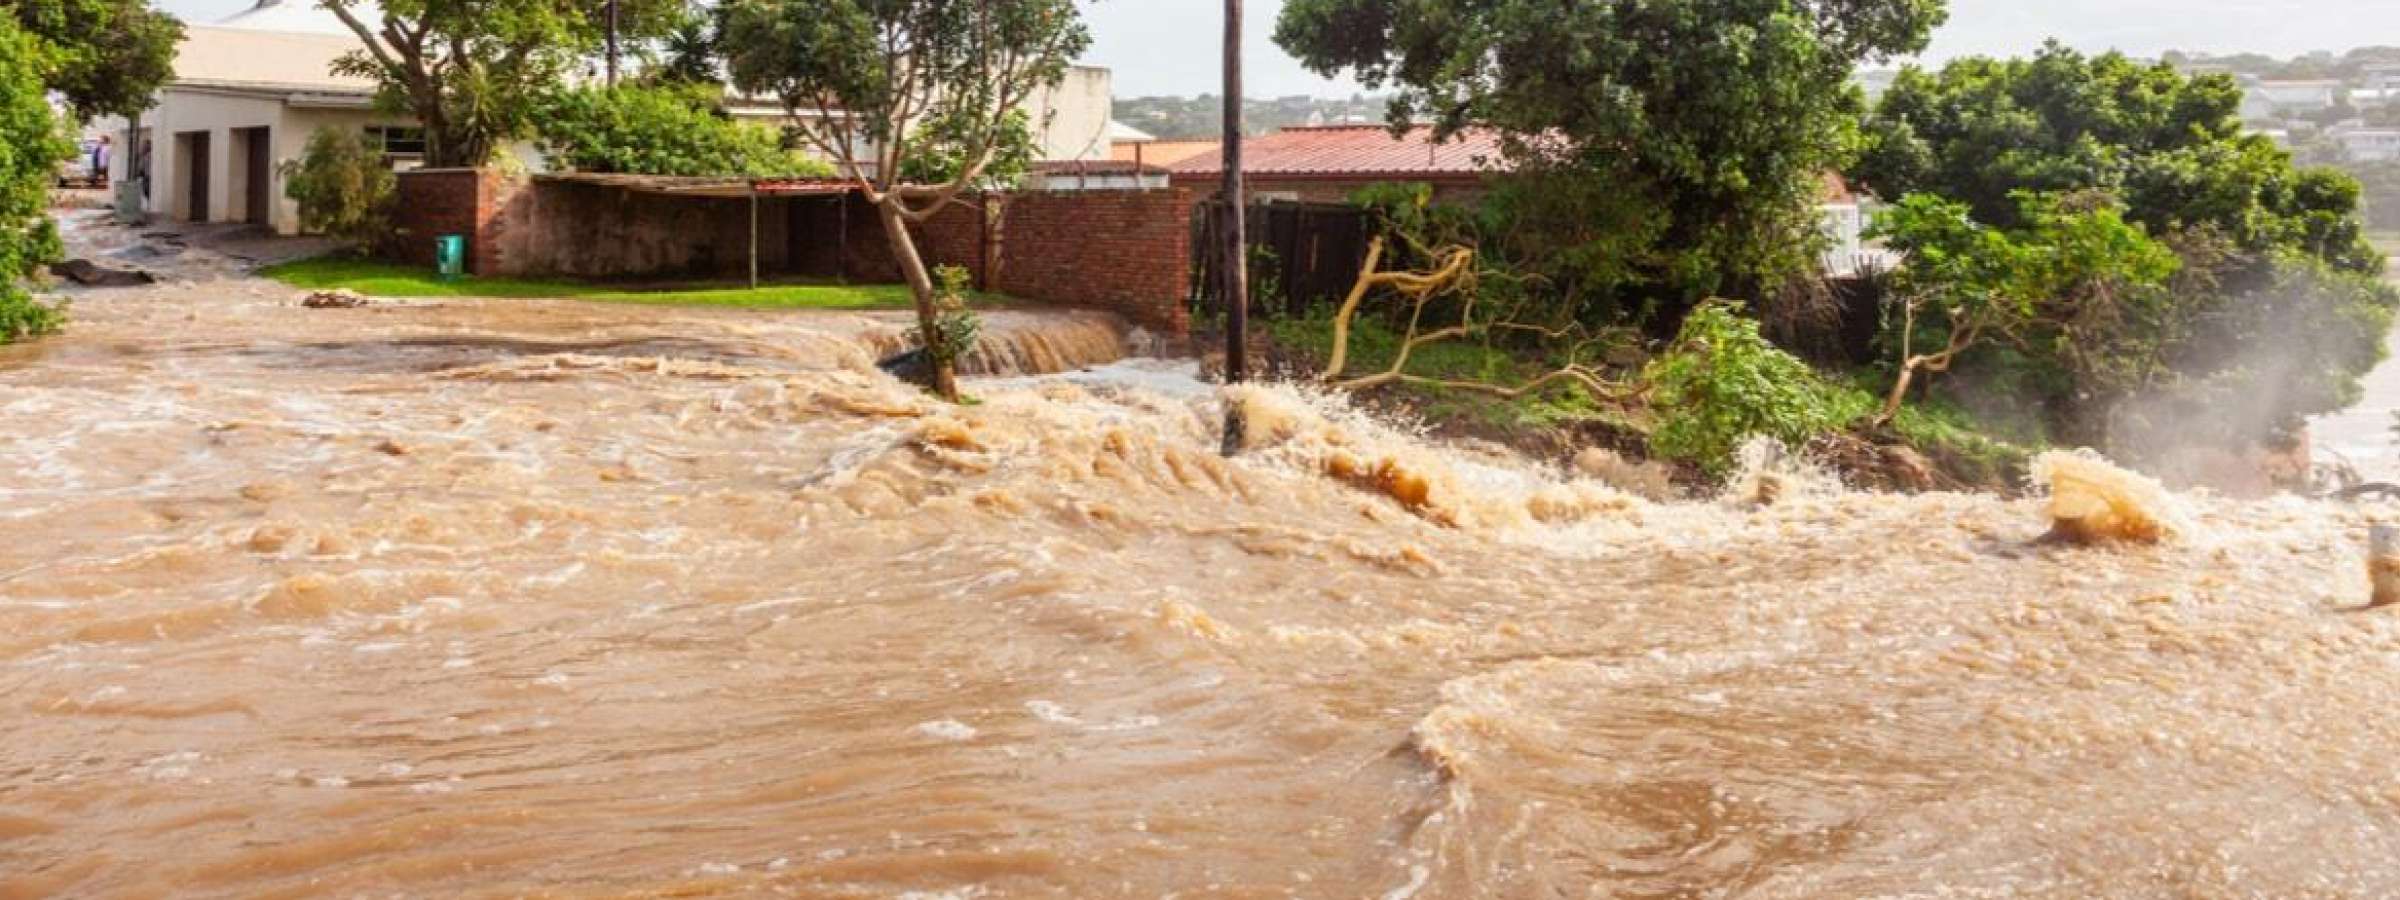 Flooded street and house in Eastern South Africa